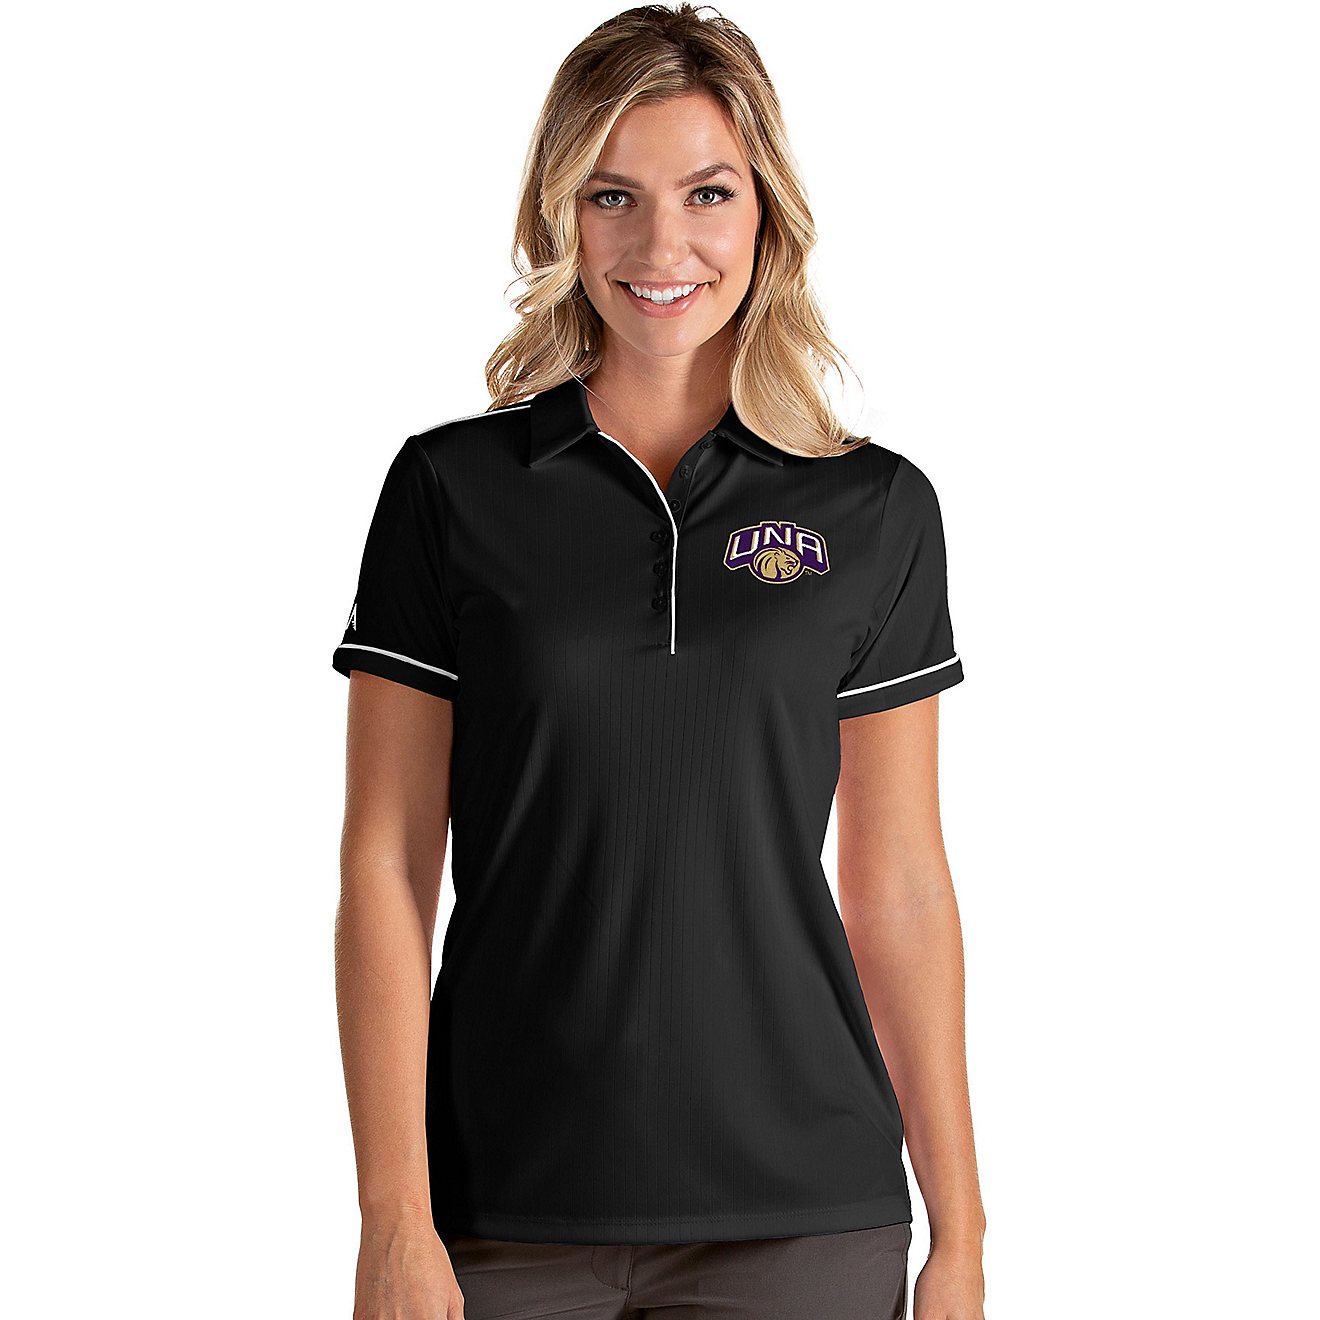 Antigua Women's University of North Alabama Salute Polo Shirt                                                                    - view number 1